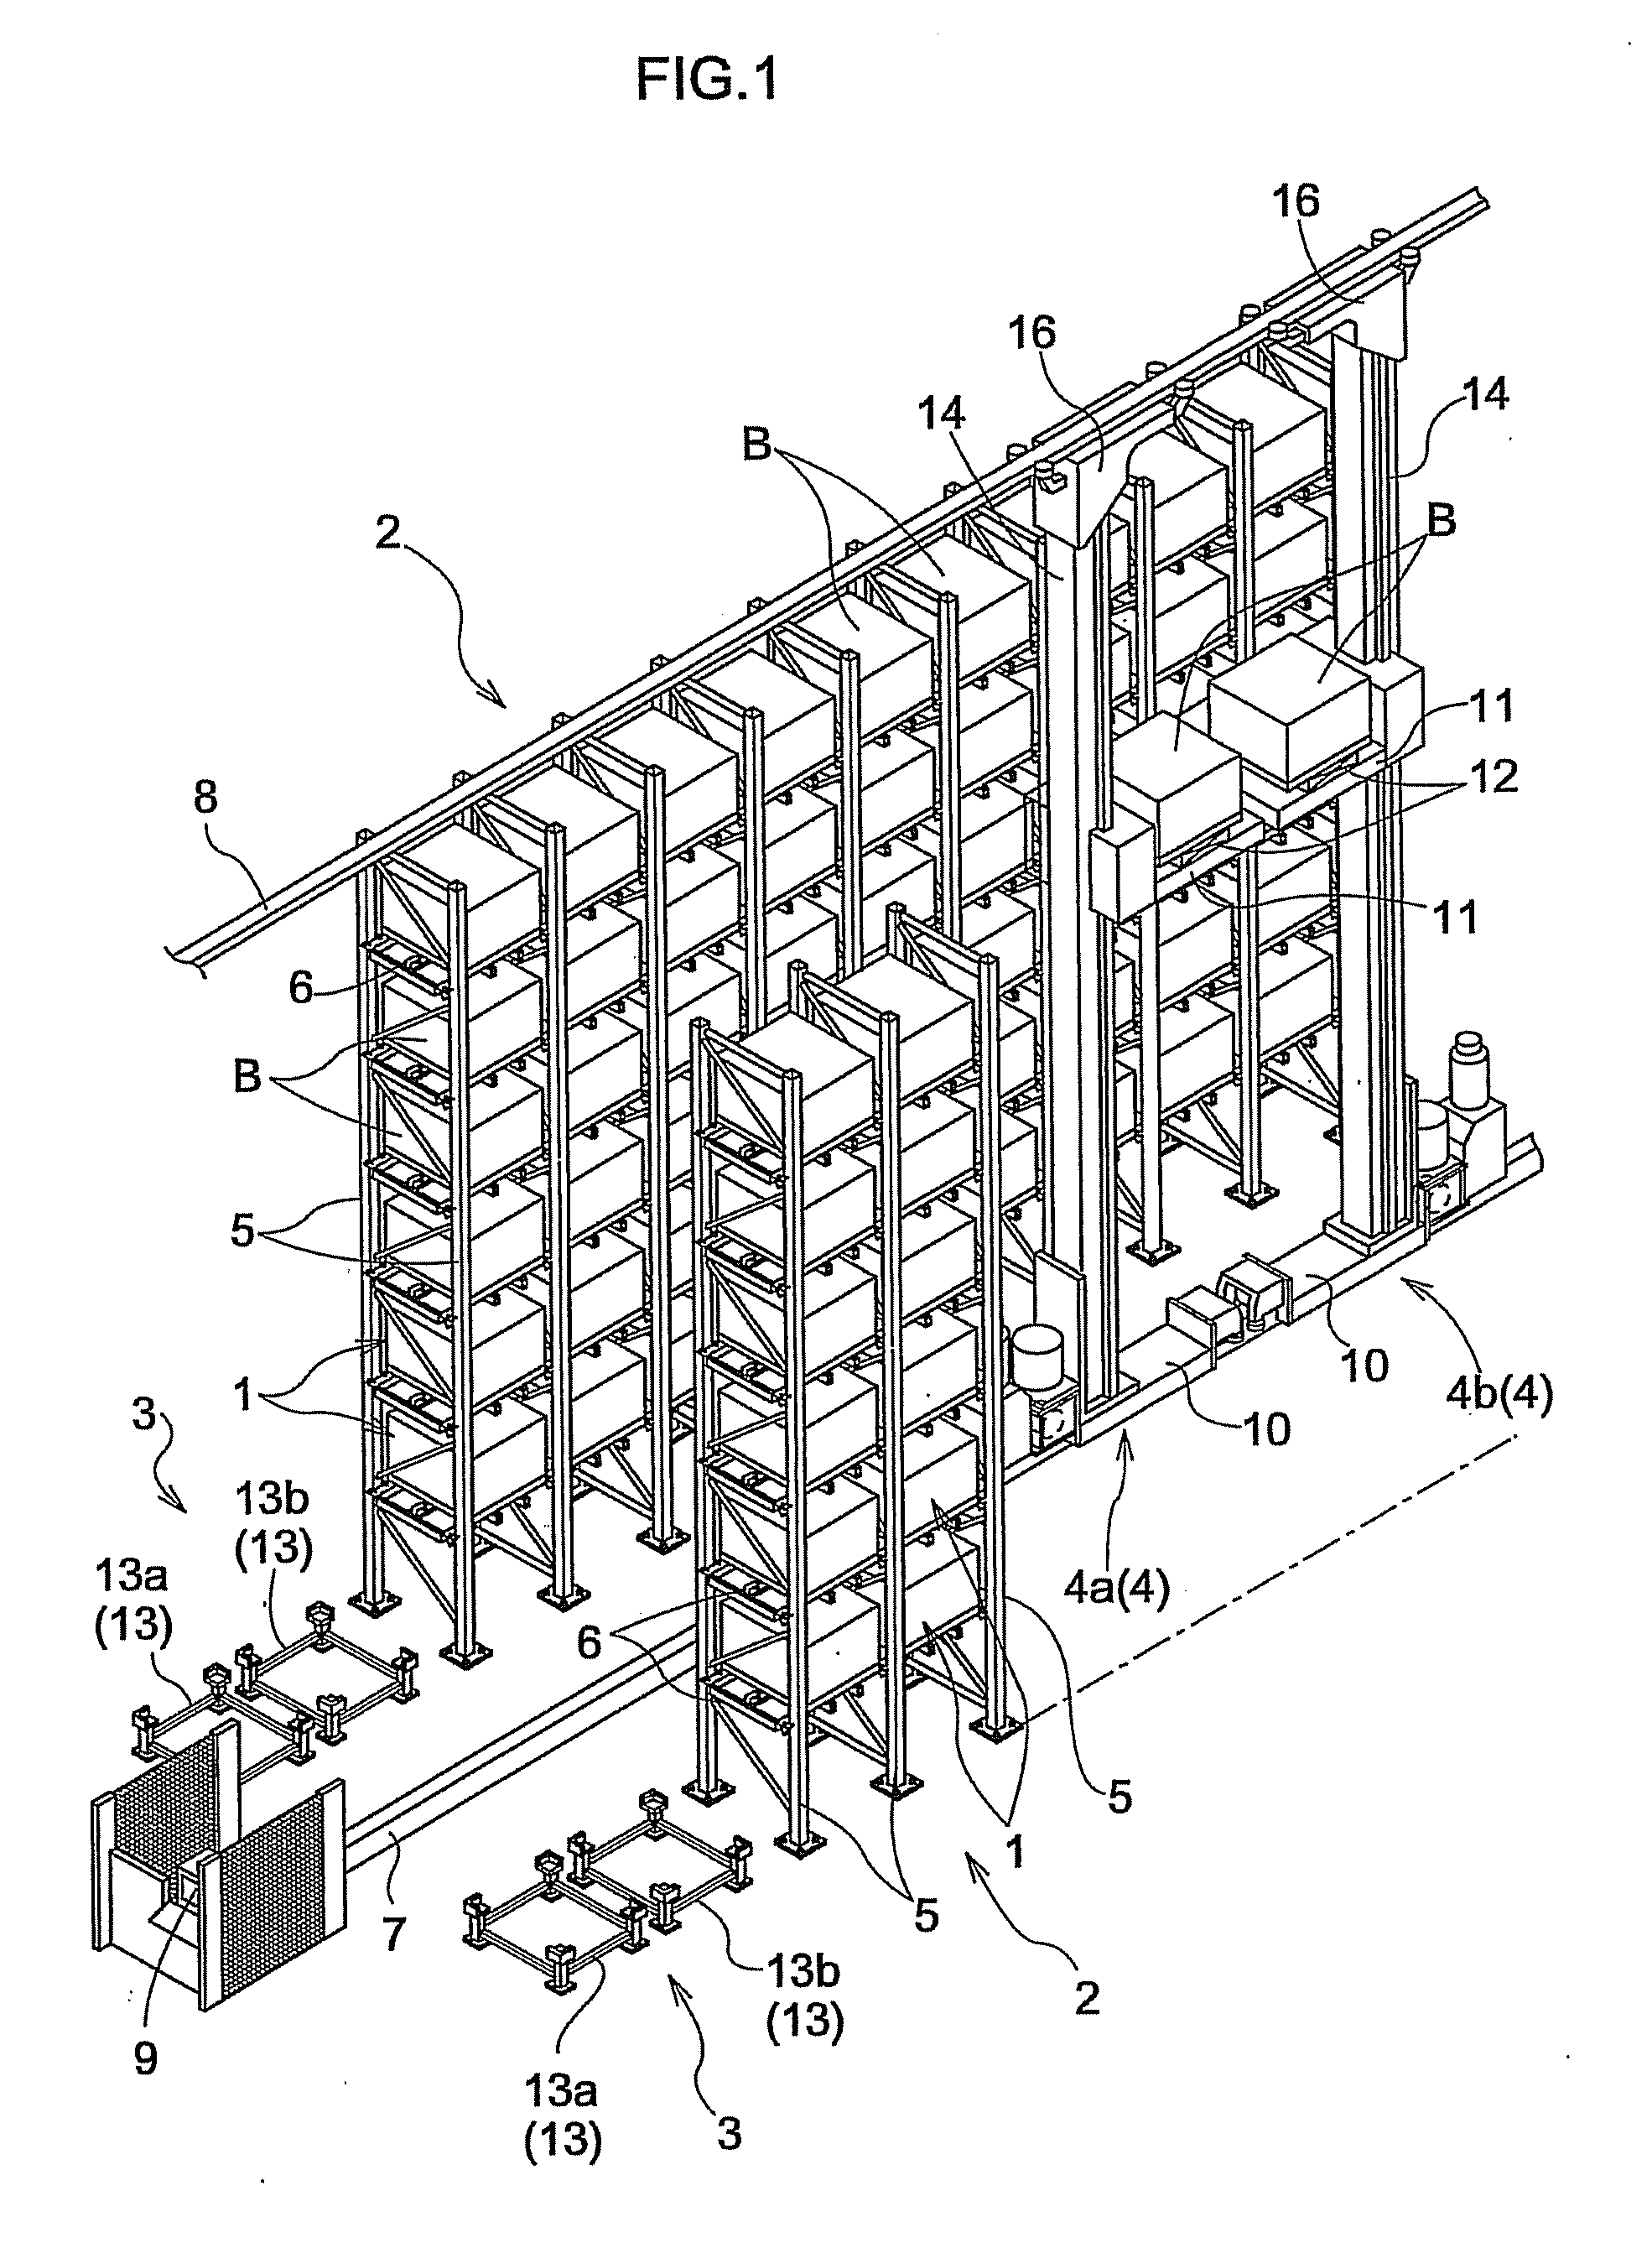 Article Transporting Apparatus and Method of Operating the Apparatus